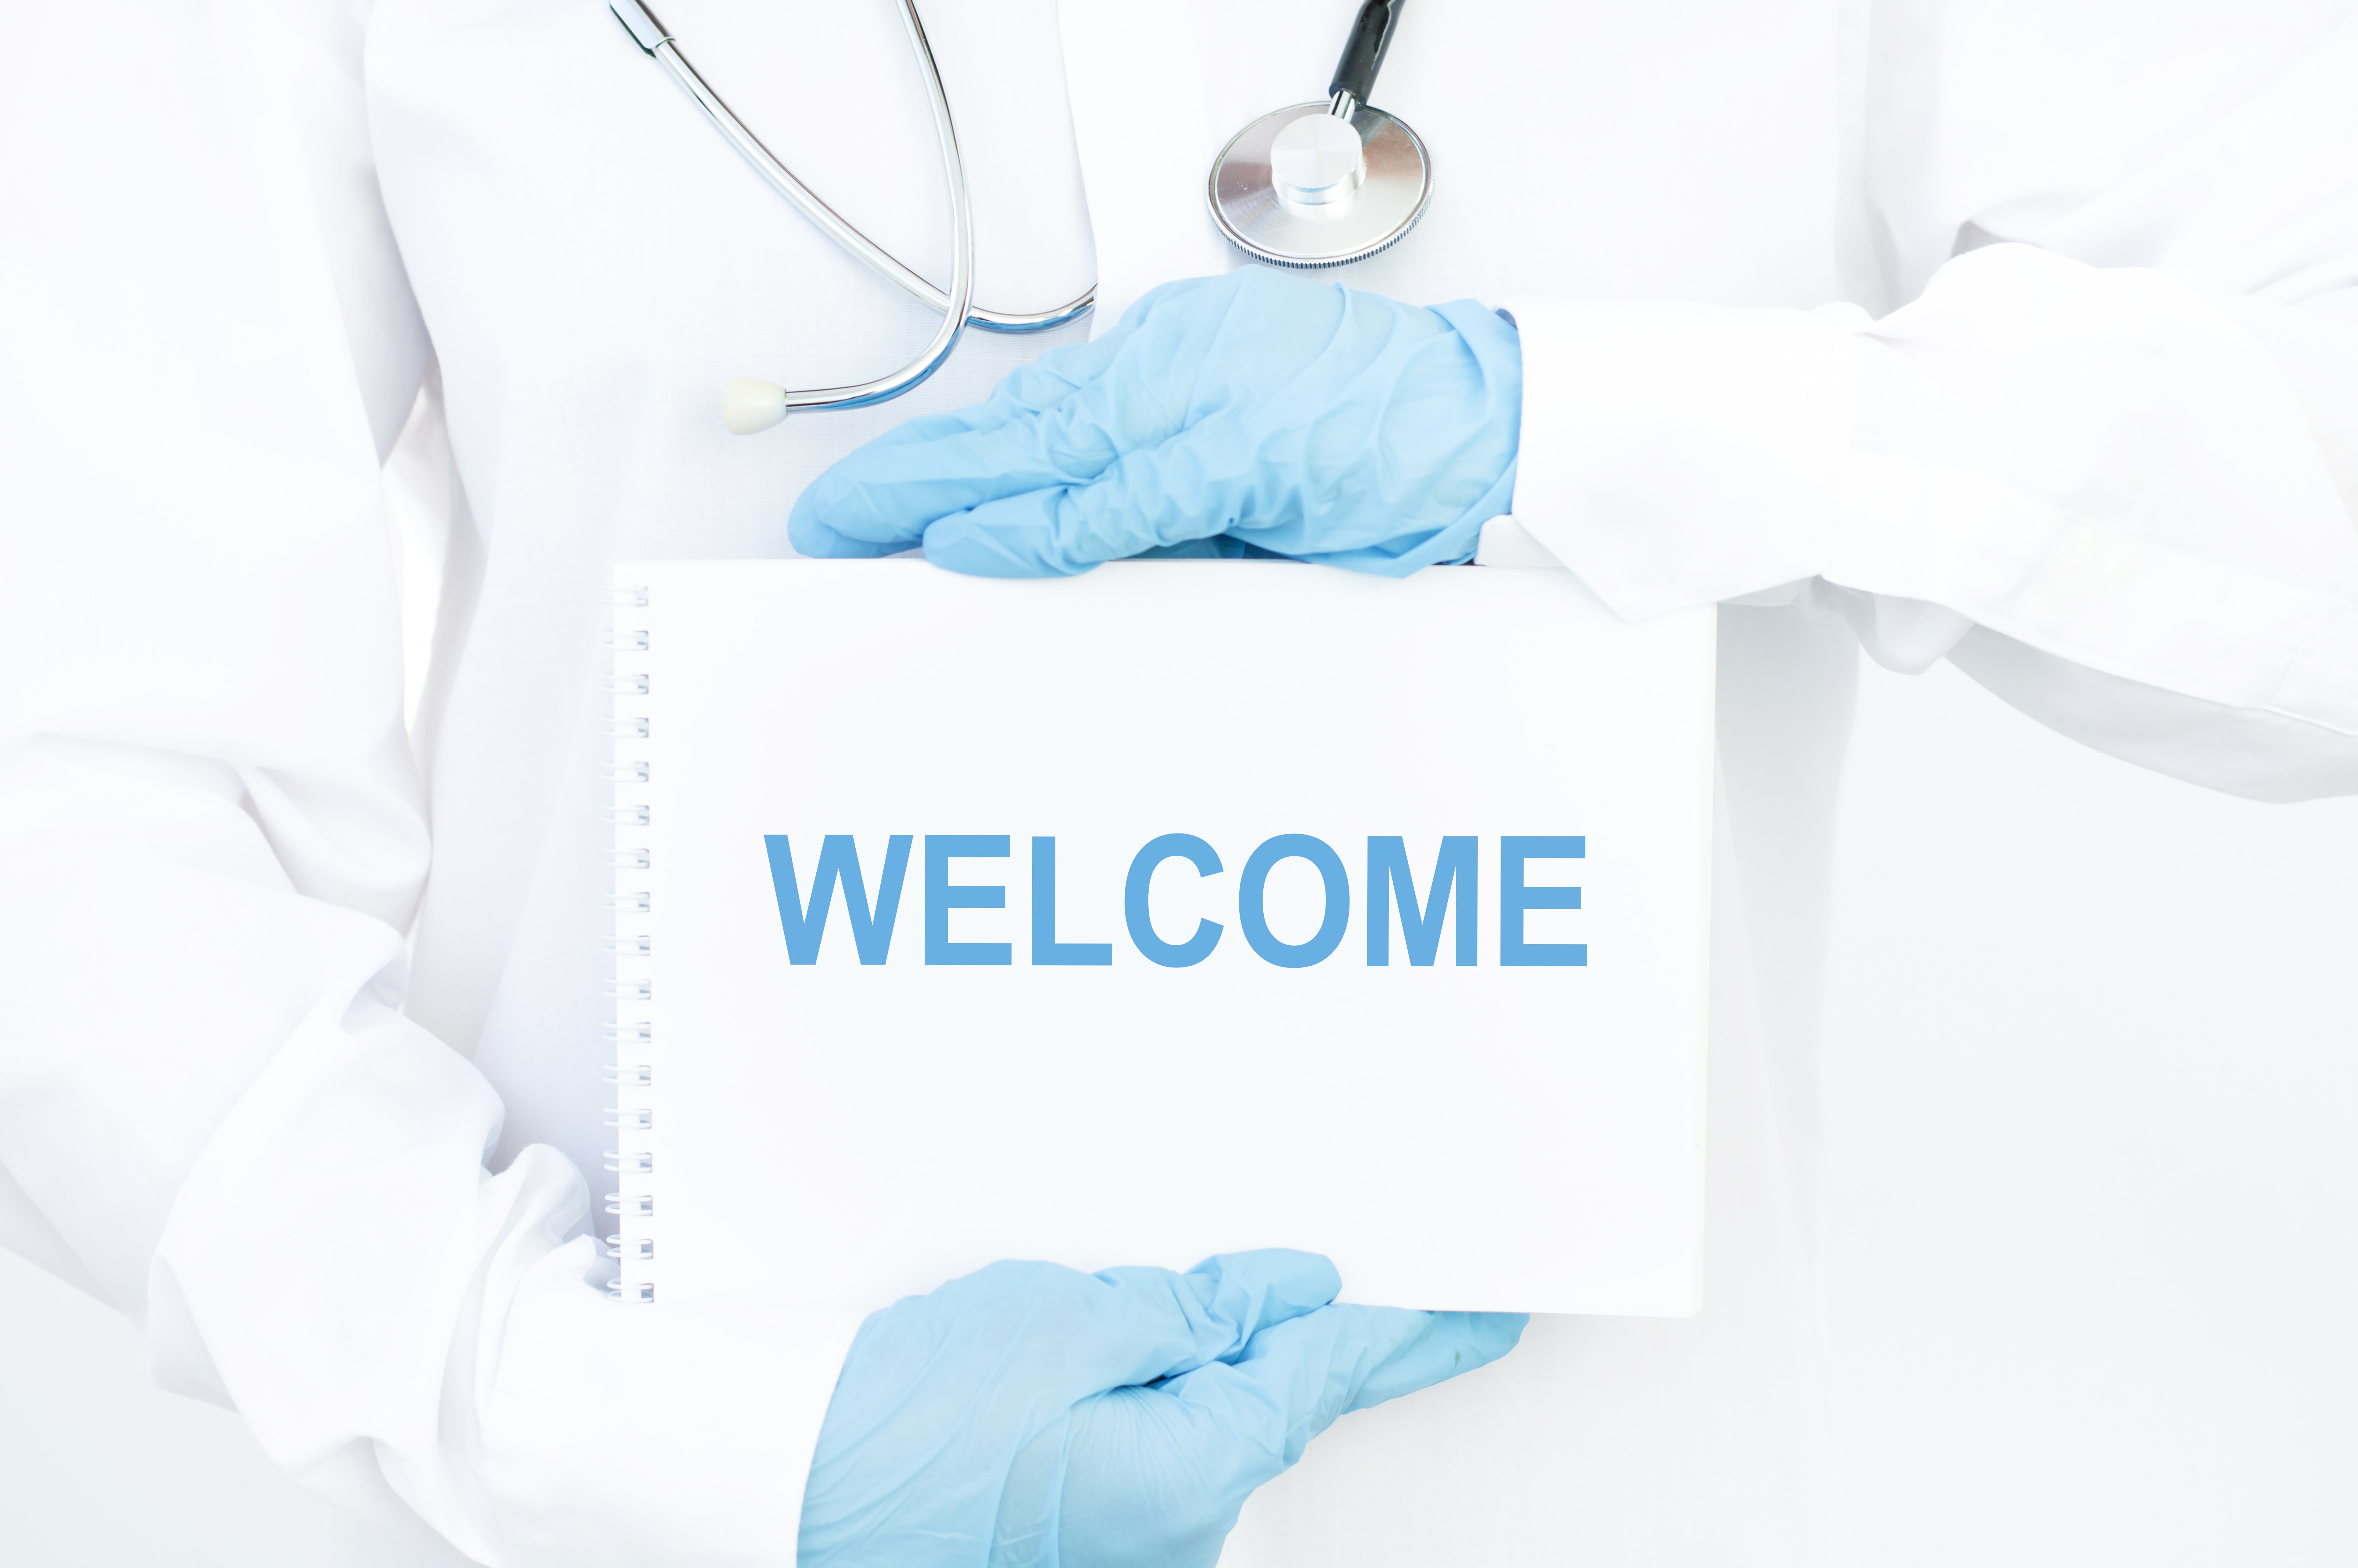 Doctor wearing white coat and blue gloves holding a "welcome" sign.|Source: Shutterstock